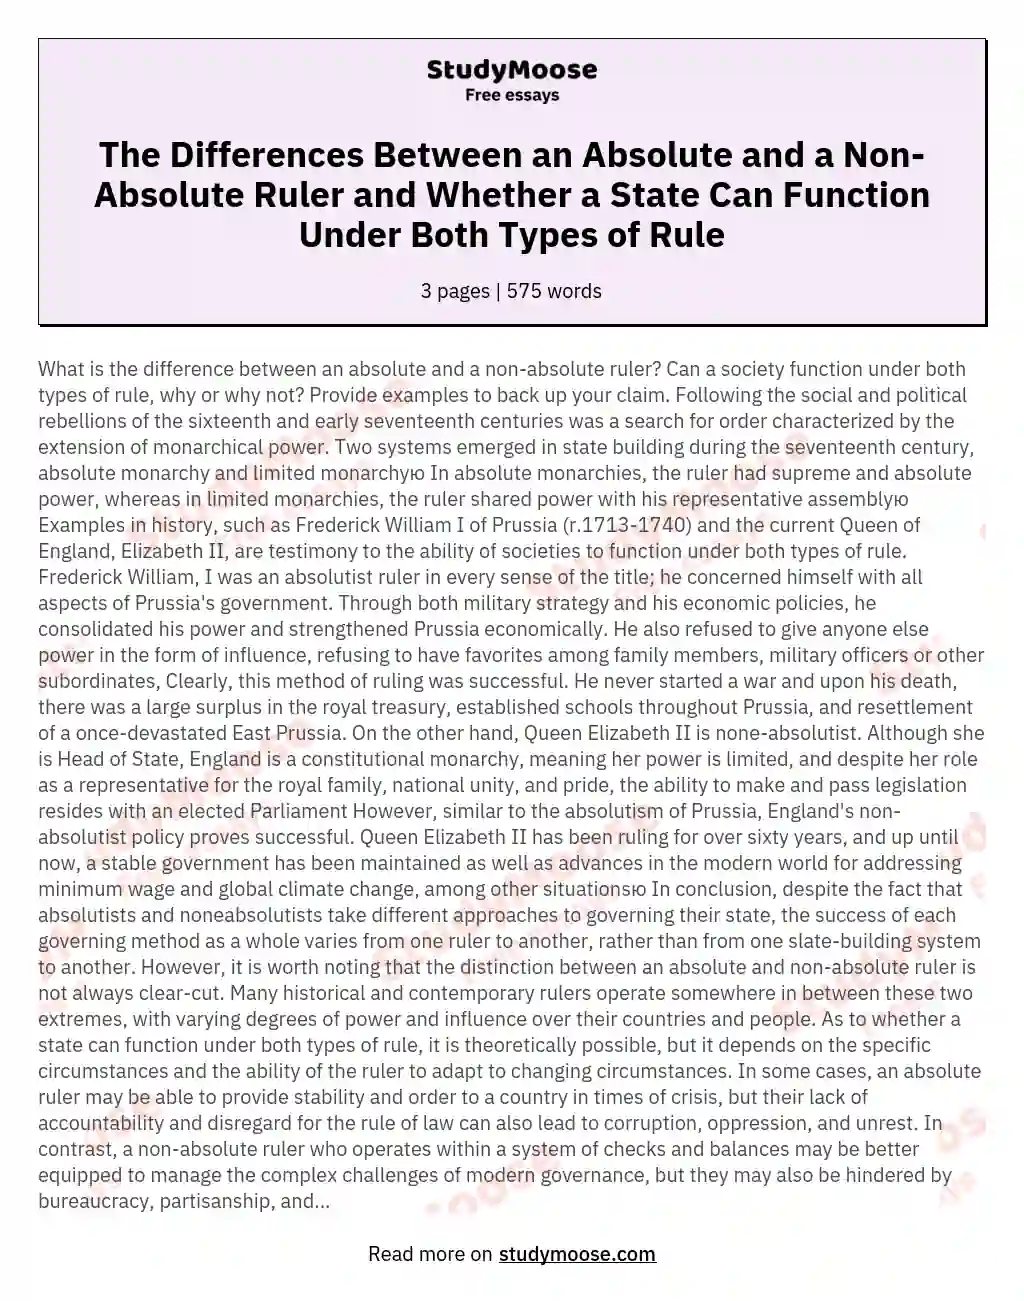 The Differences Between an Absolute and a Non-Absolute Ruler and Whether a State Can Function Under Both Types of Rule essay